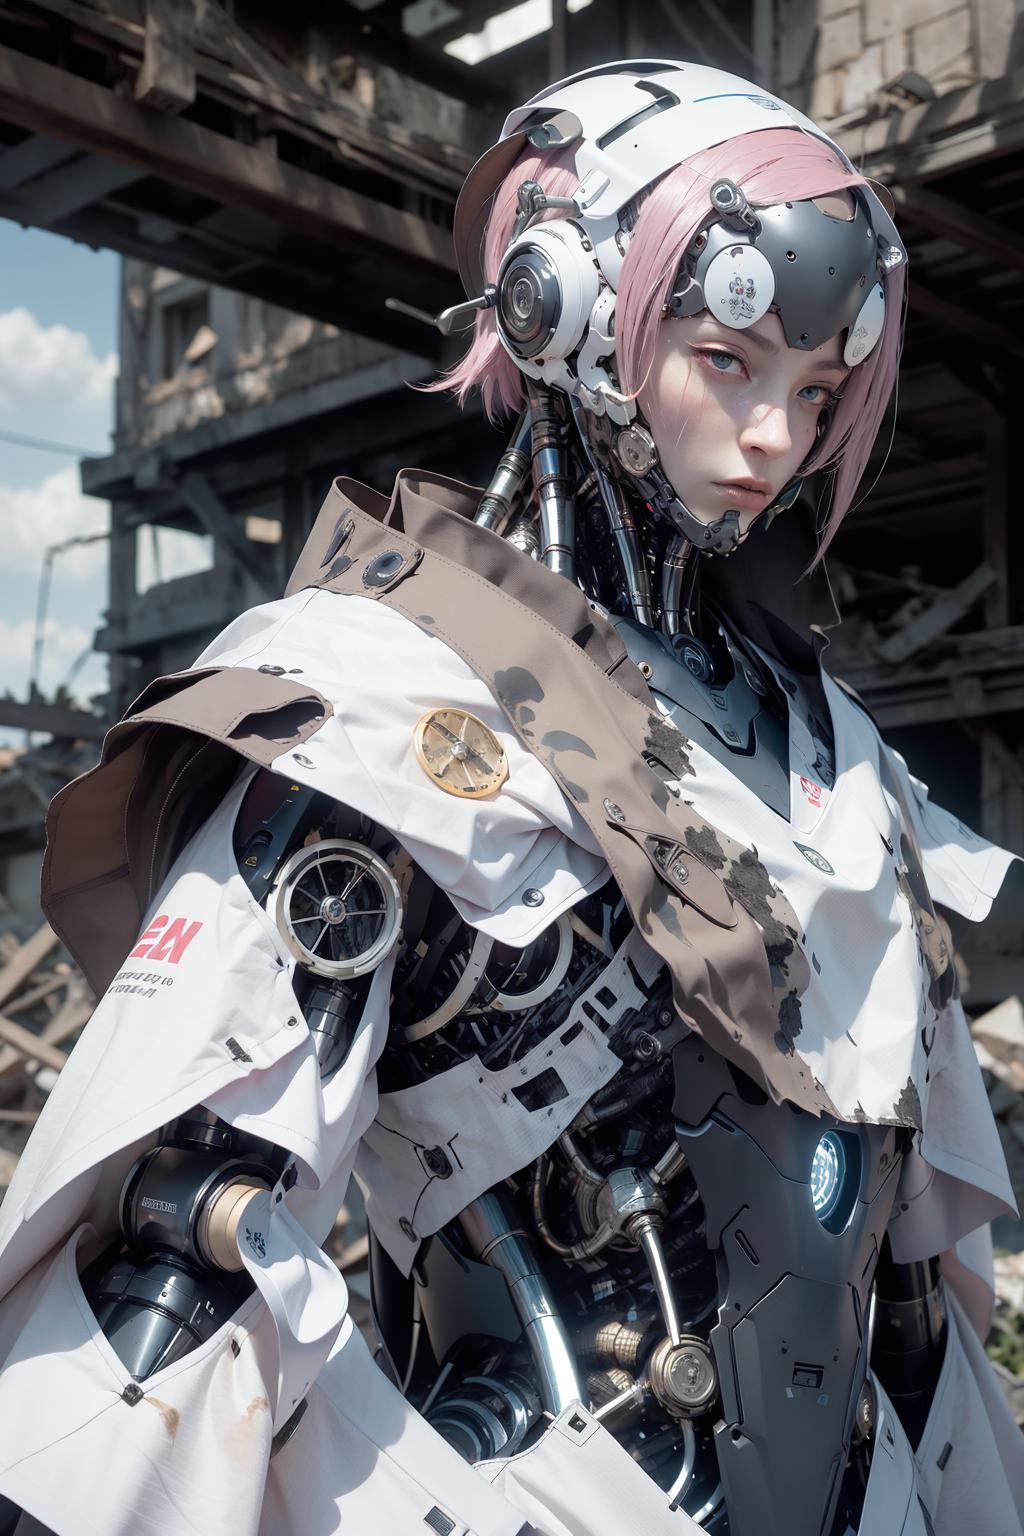 A woman with pink hair is wearing a jacket and a robotic arm.